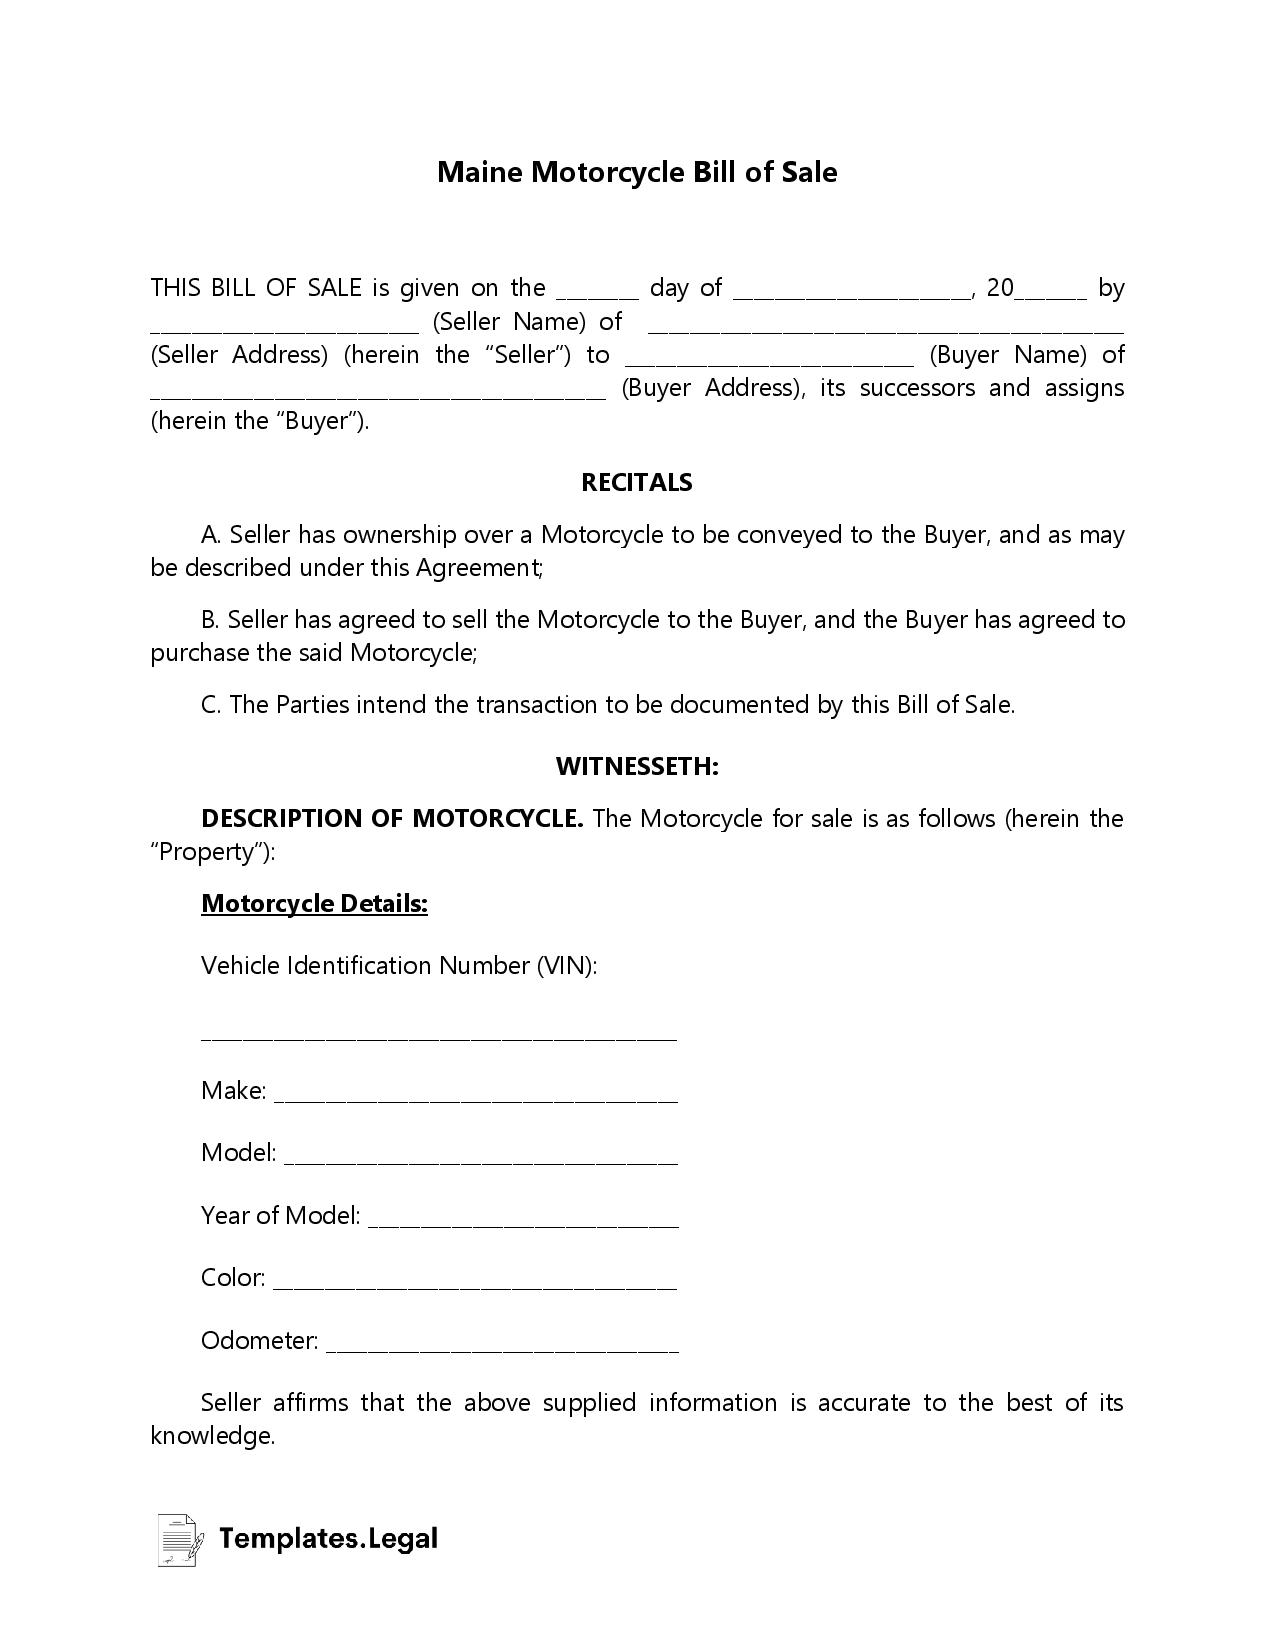 Maine Motorcycle Bill of Sale - Templates.Legal